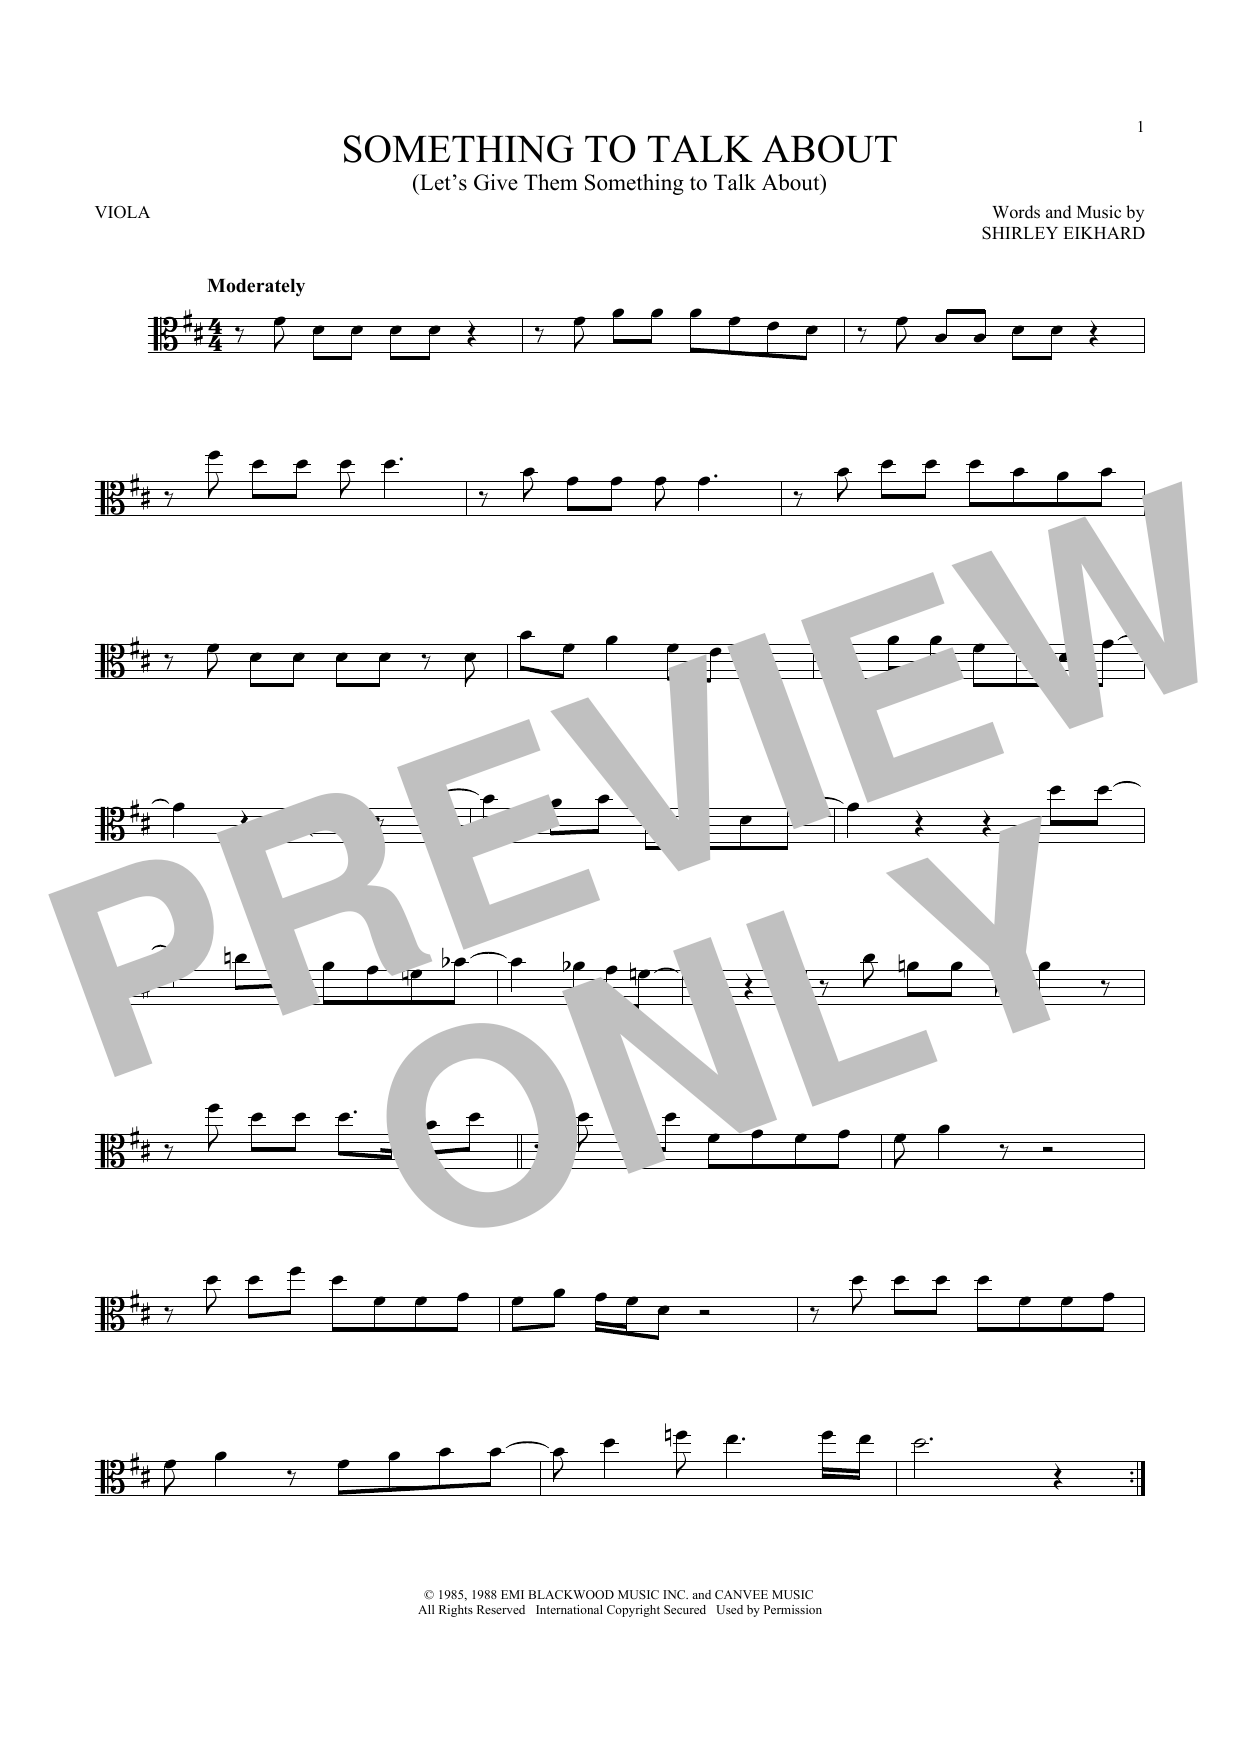 Download Bonnie Raitt Something To Talk About (Let's Give The Sheet Music